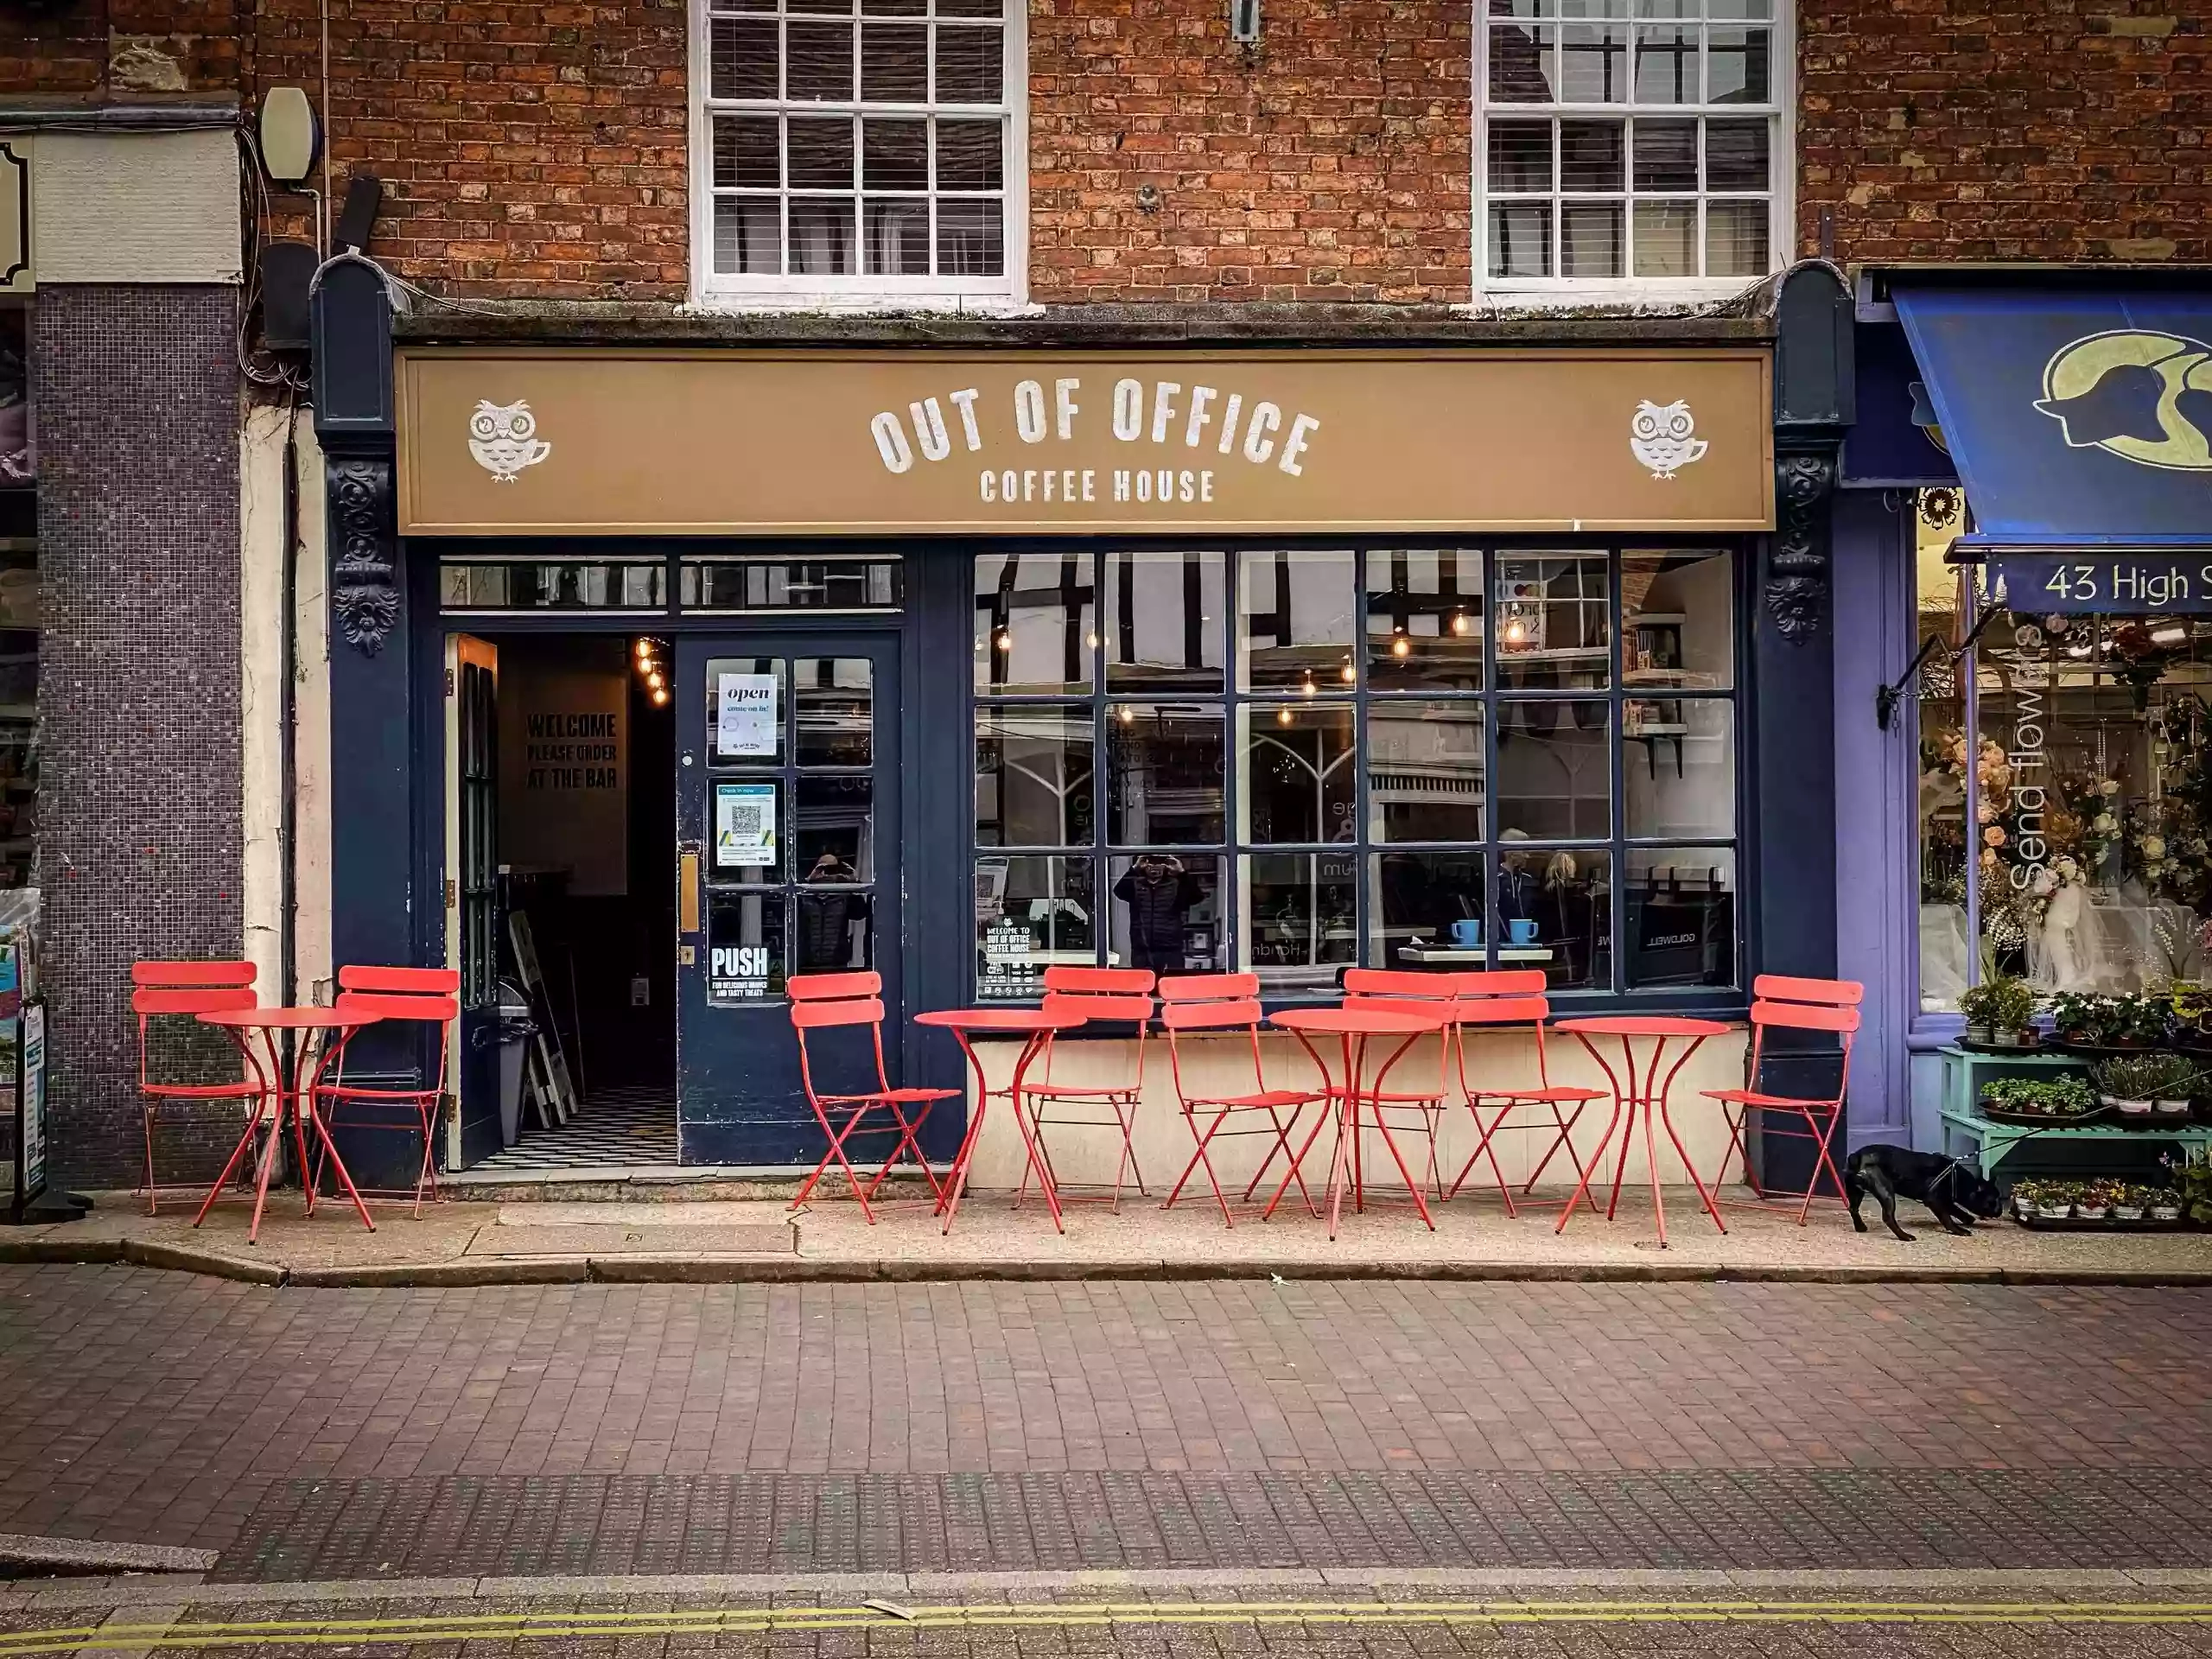 Out Of Office Coffee House - Newport Pagnell